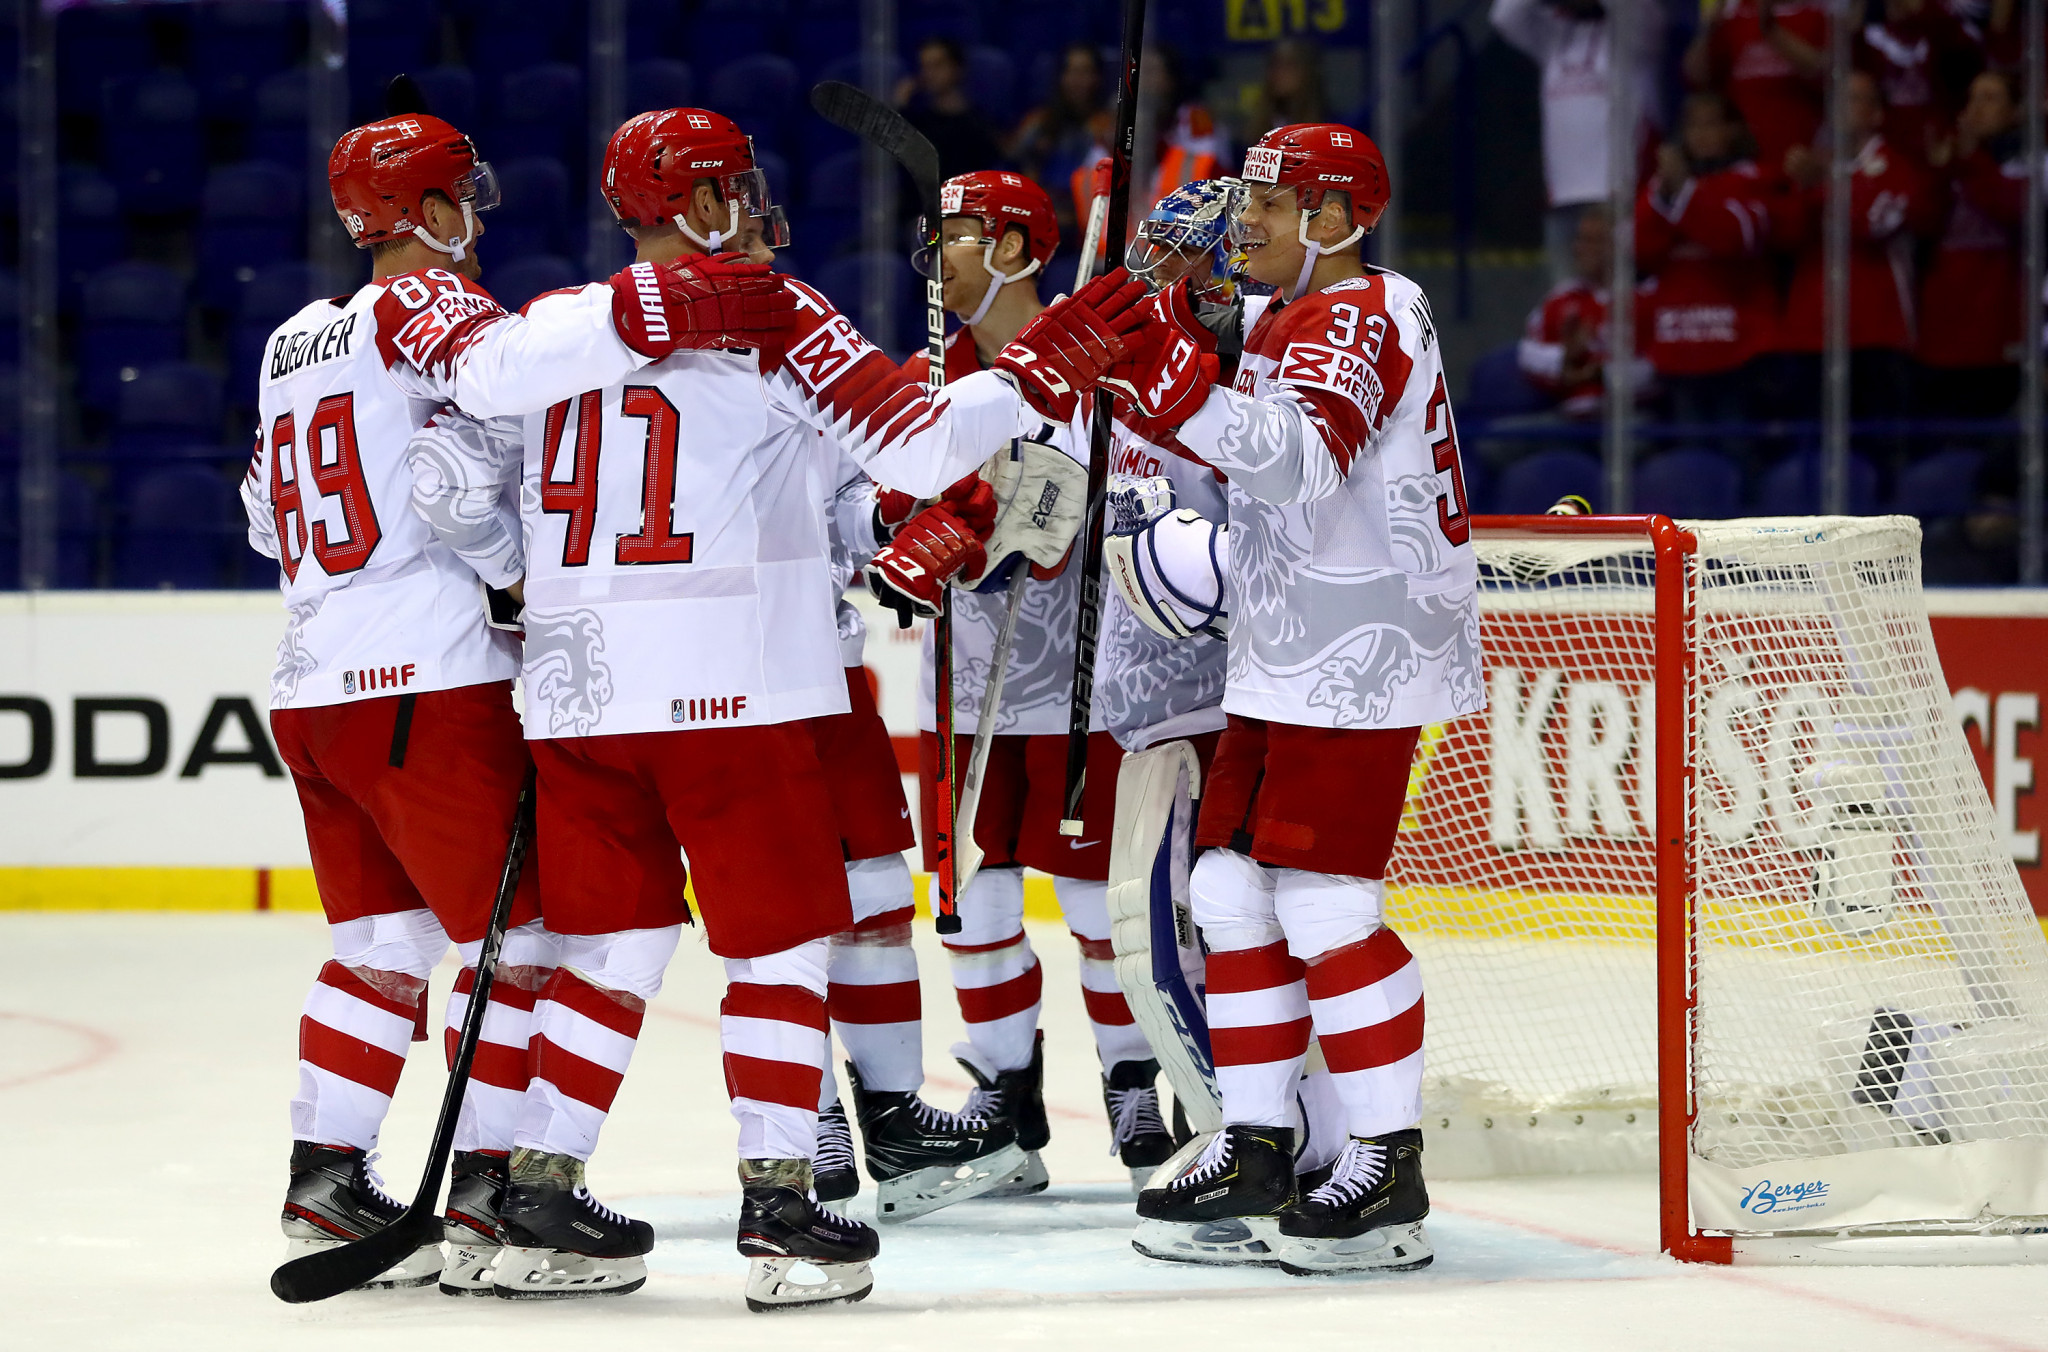 Denmark thrashed Great Britain 9-0 to put themselves in contention for securing a quarter-final place at the IIHF World Championship in Slovakia ©Getty Images